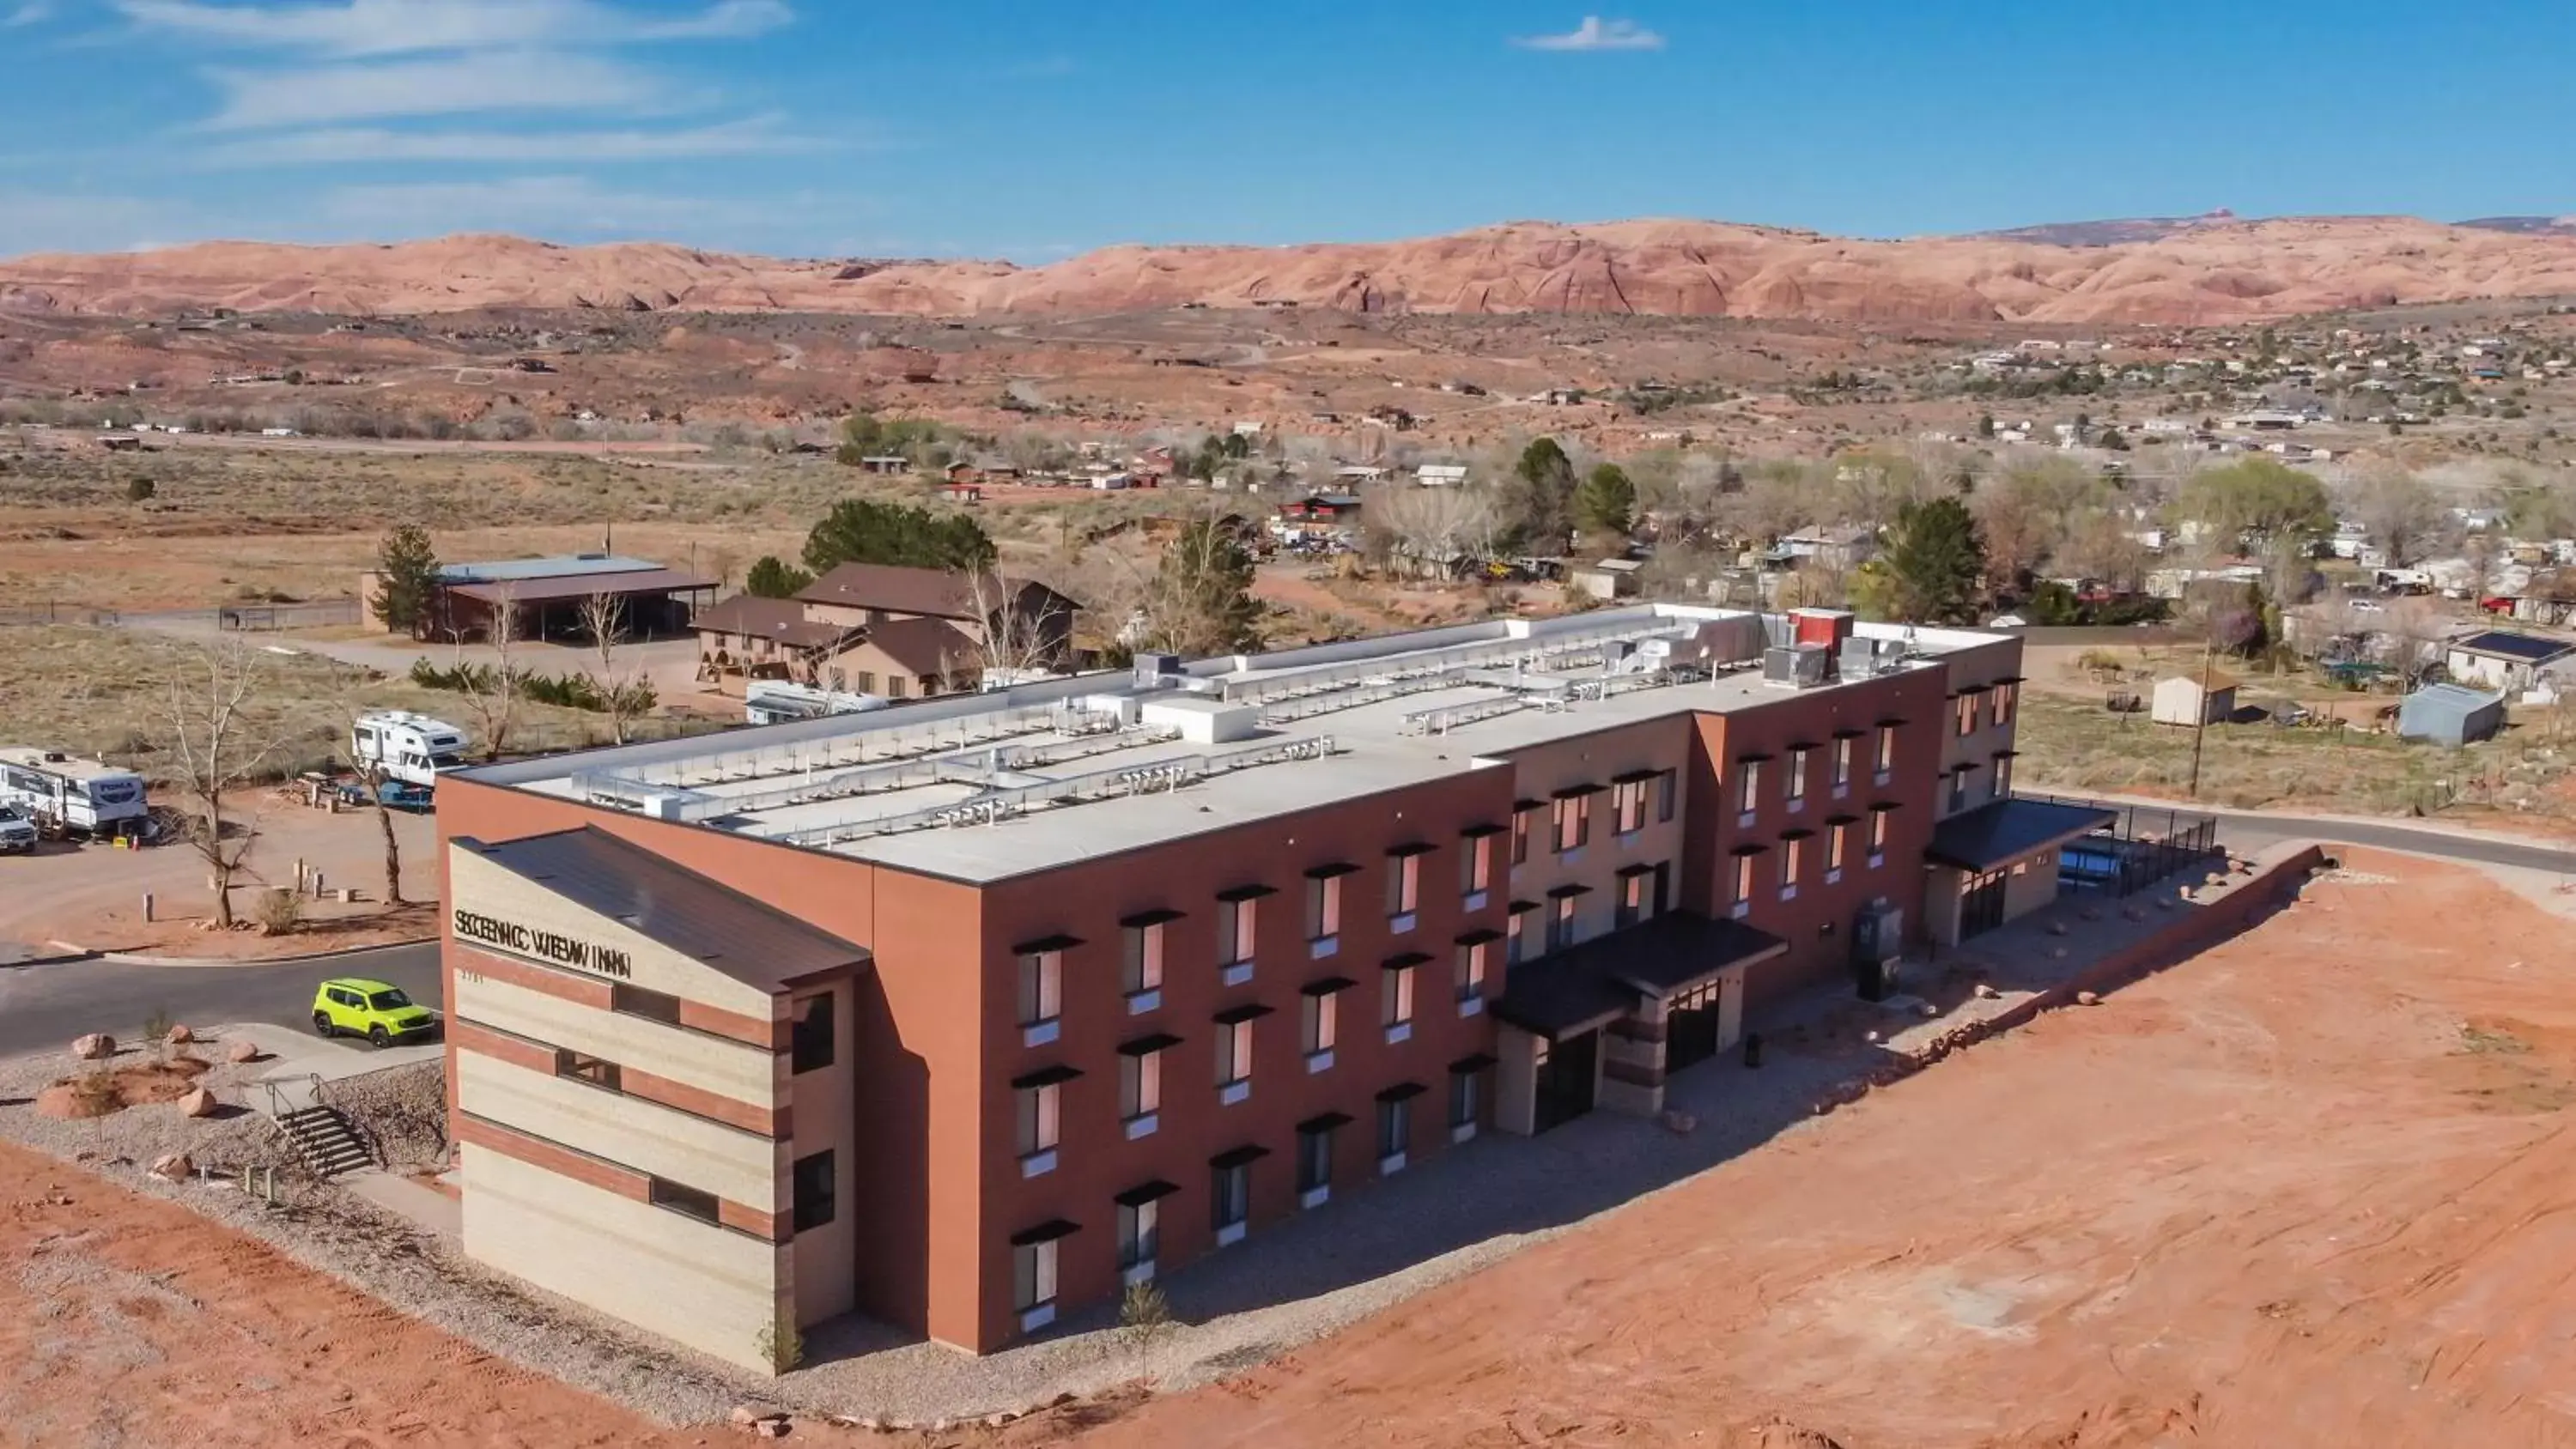 Property building in Scenic View Inn & Suites Moab